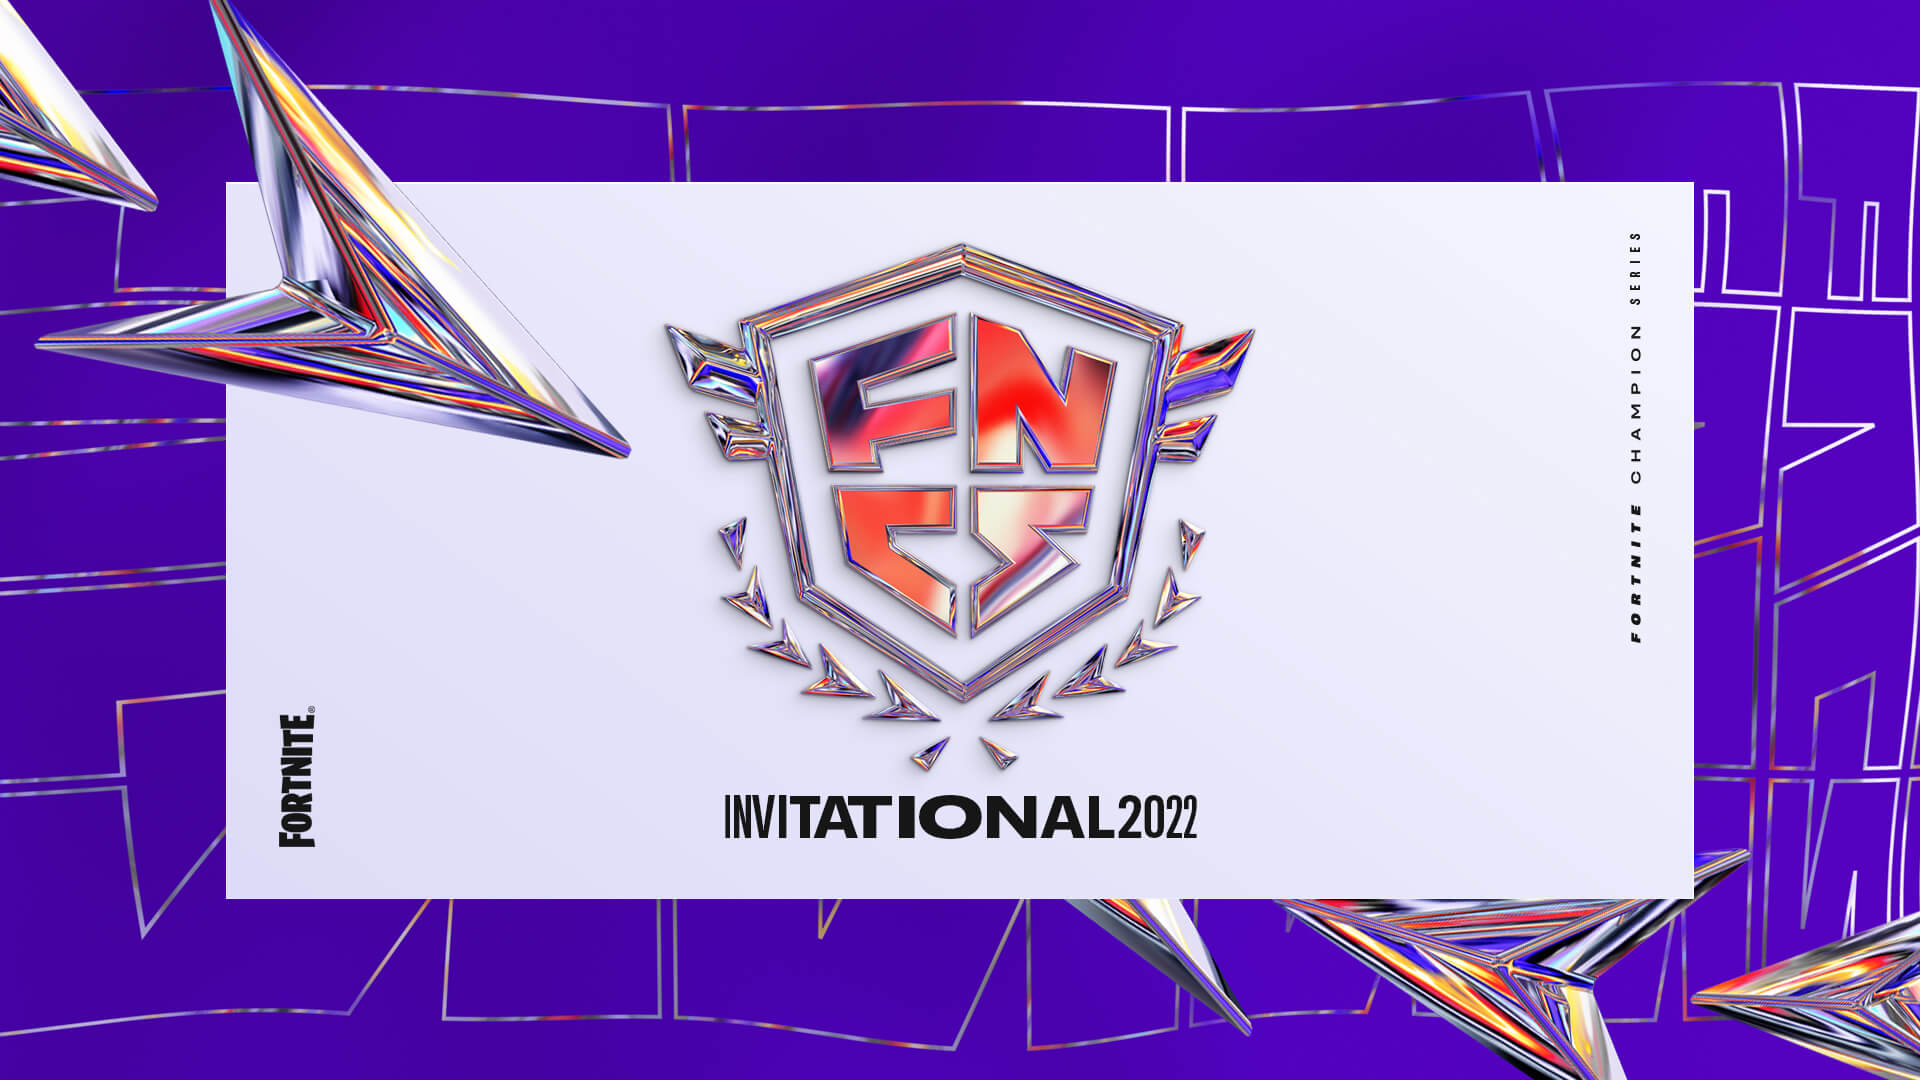 An image advertising the Fortnite Championship Series Invitational 2022